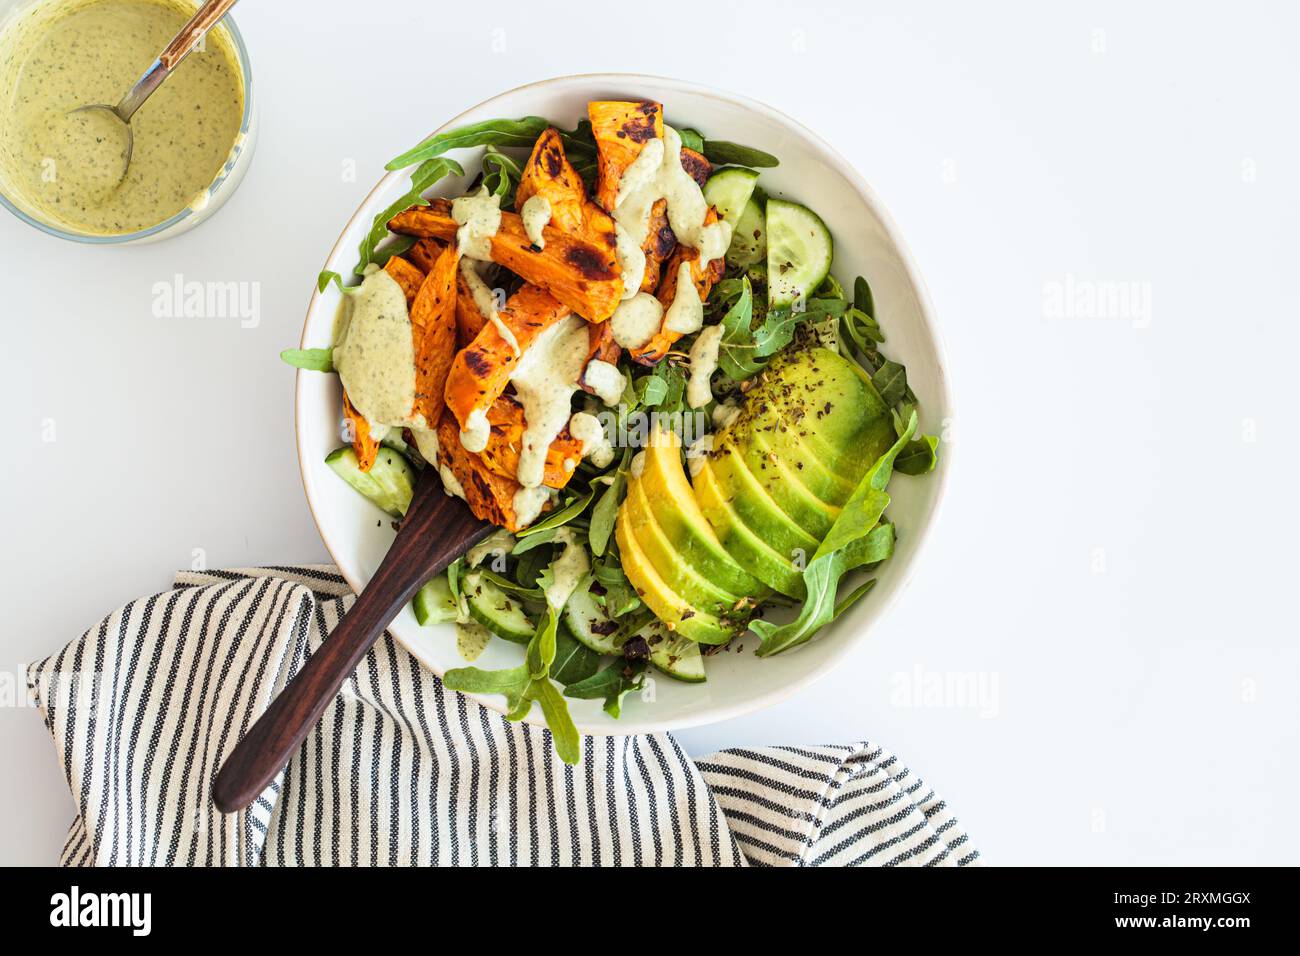 Baked sweet potato wedges salad with cucumber, avocado and creamy tahini dressing, white background, top view. Vegan recipe concept. Stock Photo